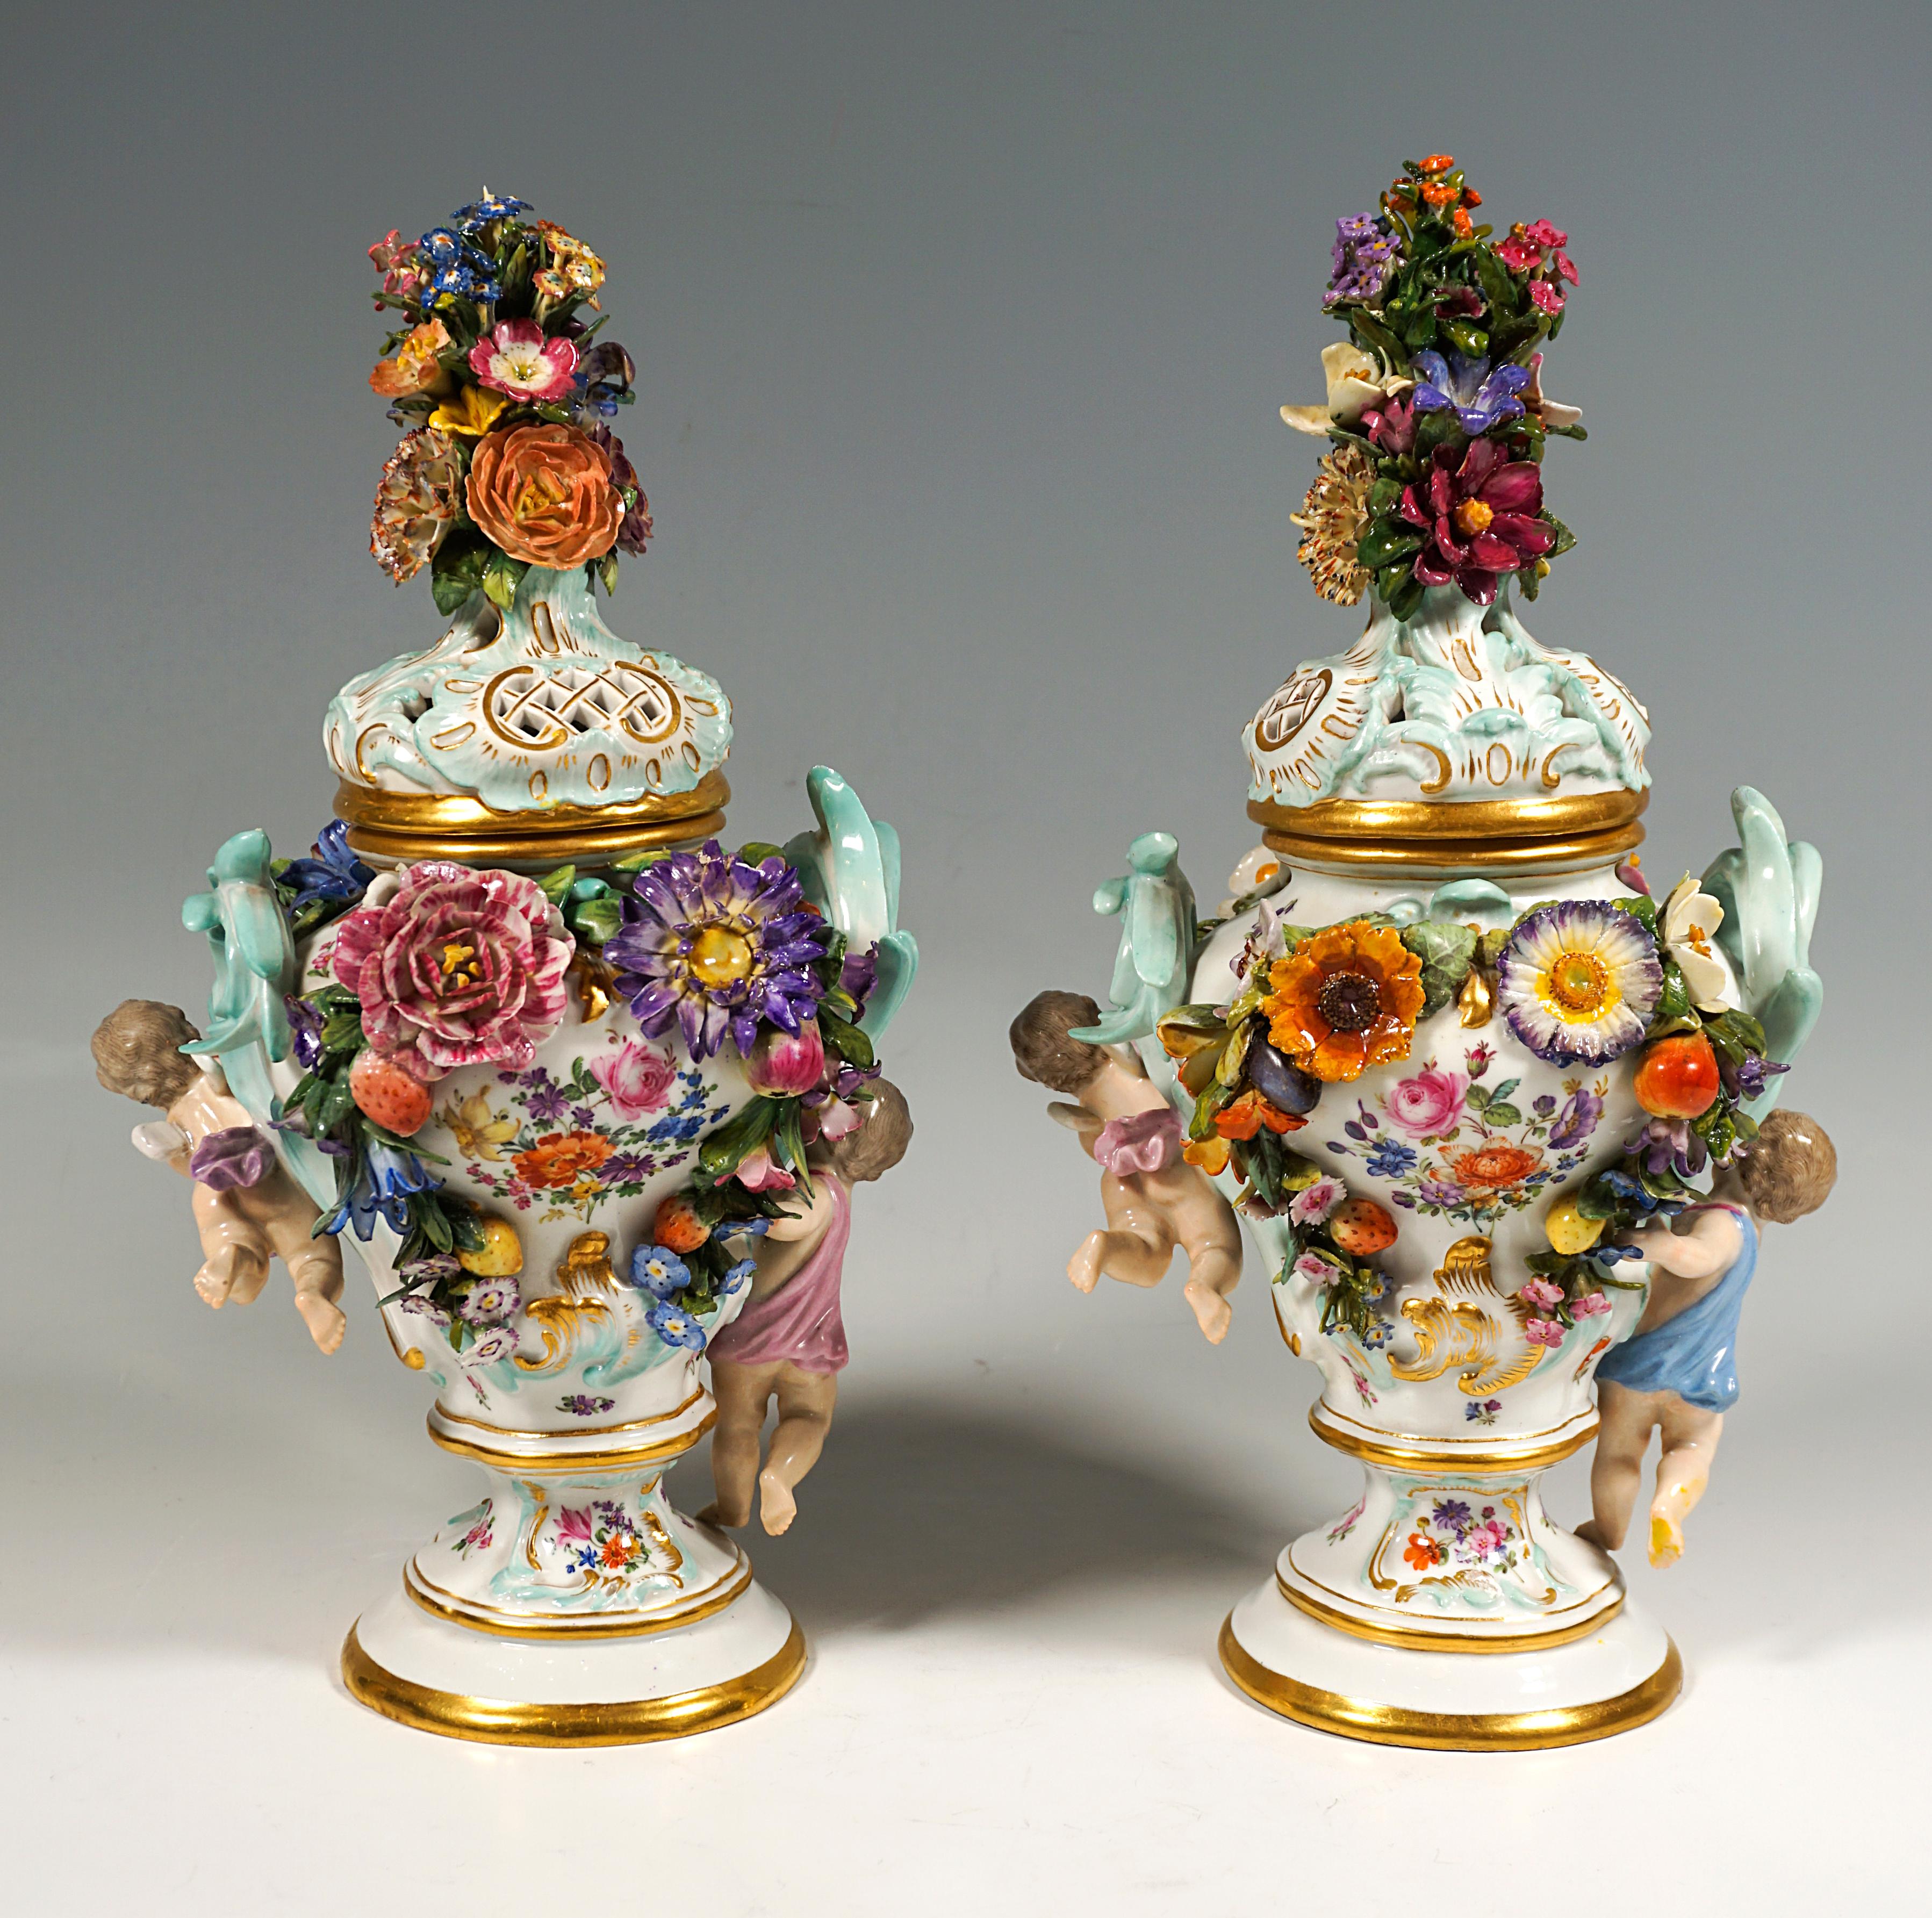 Baluster-shaped vase body on a stepped, round base with a pierced lid, lavishly decorated with sculpted and colourfully painted flowers, leaves, fruit and rocailles, as well as two cupids on the sides, with coloured scattered flower decoration in